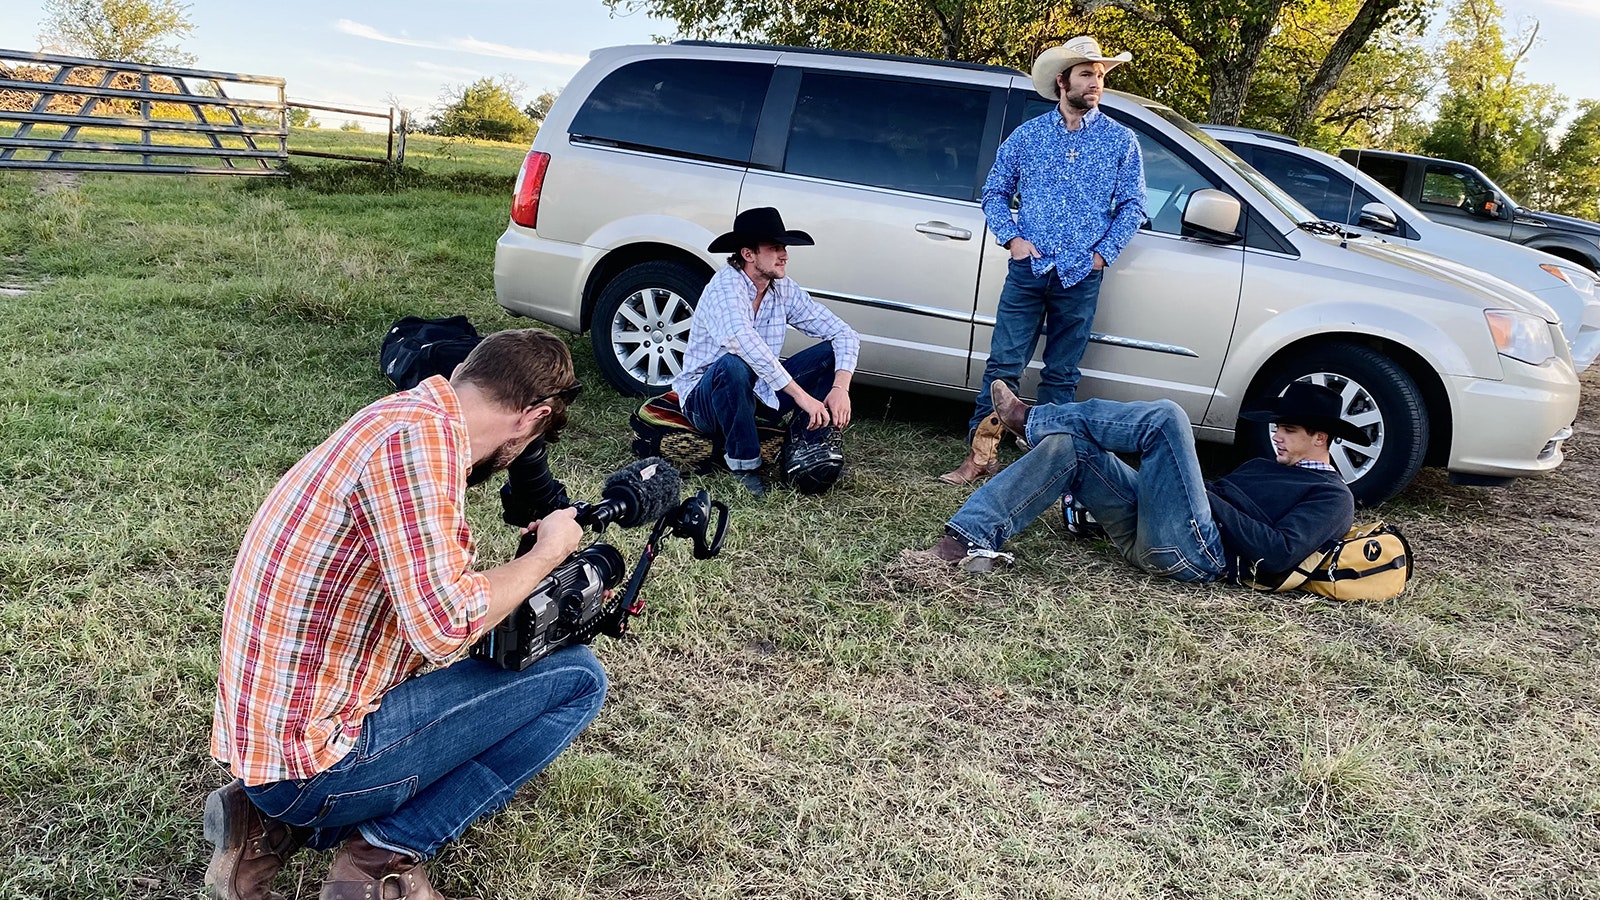 Bull rider Clayton Savage said he tried to pretend the cameras weren't there during the filming of the documentary.